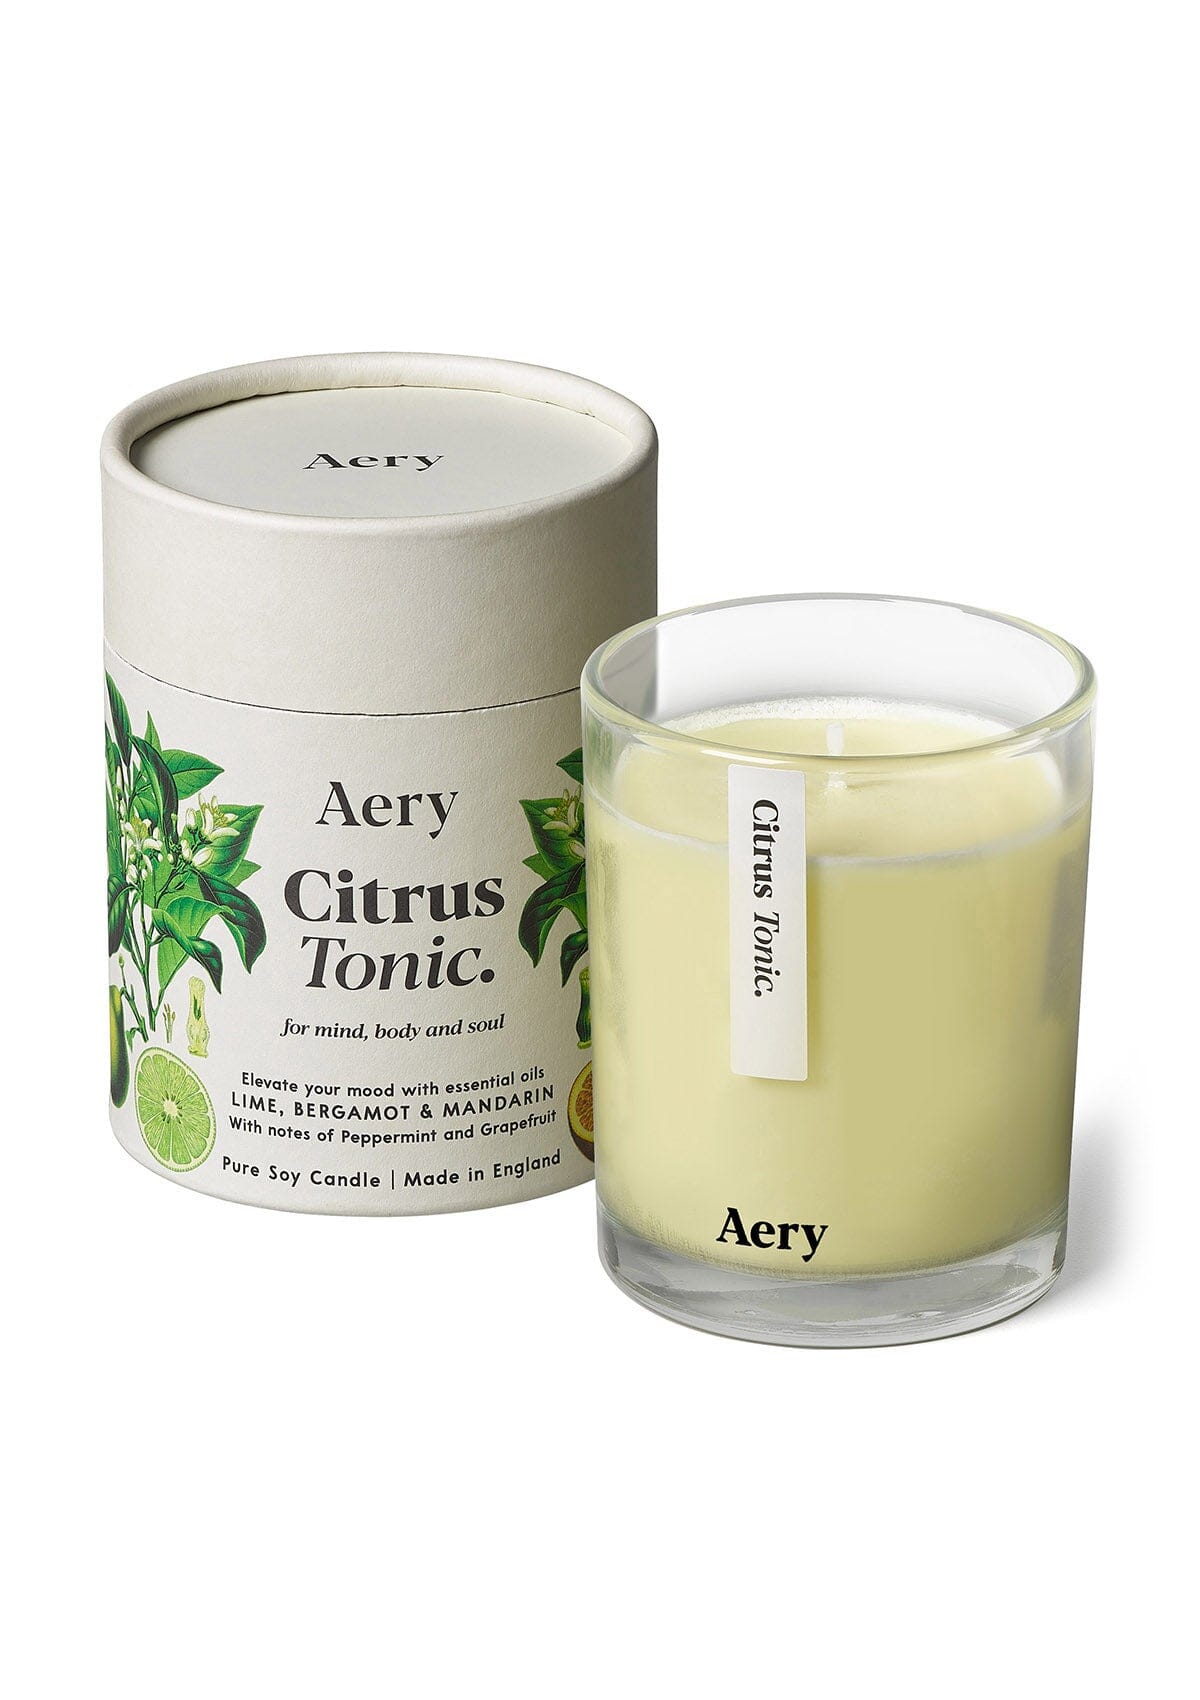 Cream Citrus Tonic glass scented candle displayed next to product packaging on white background 